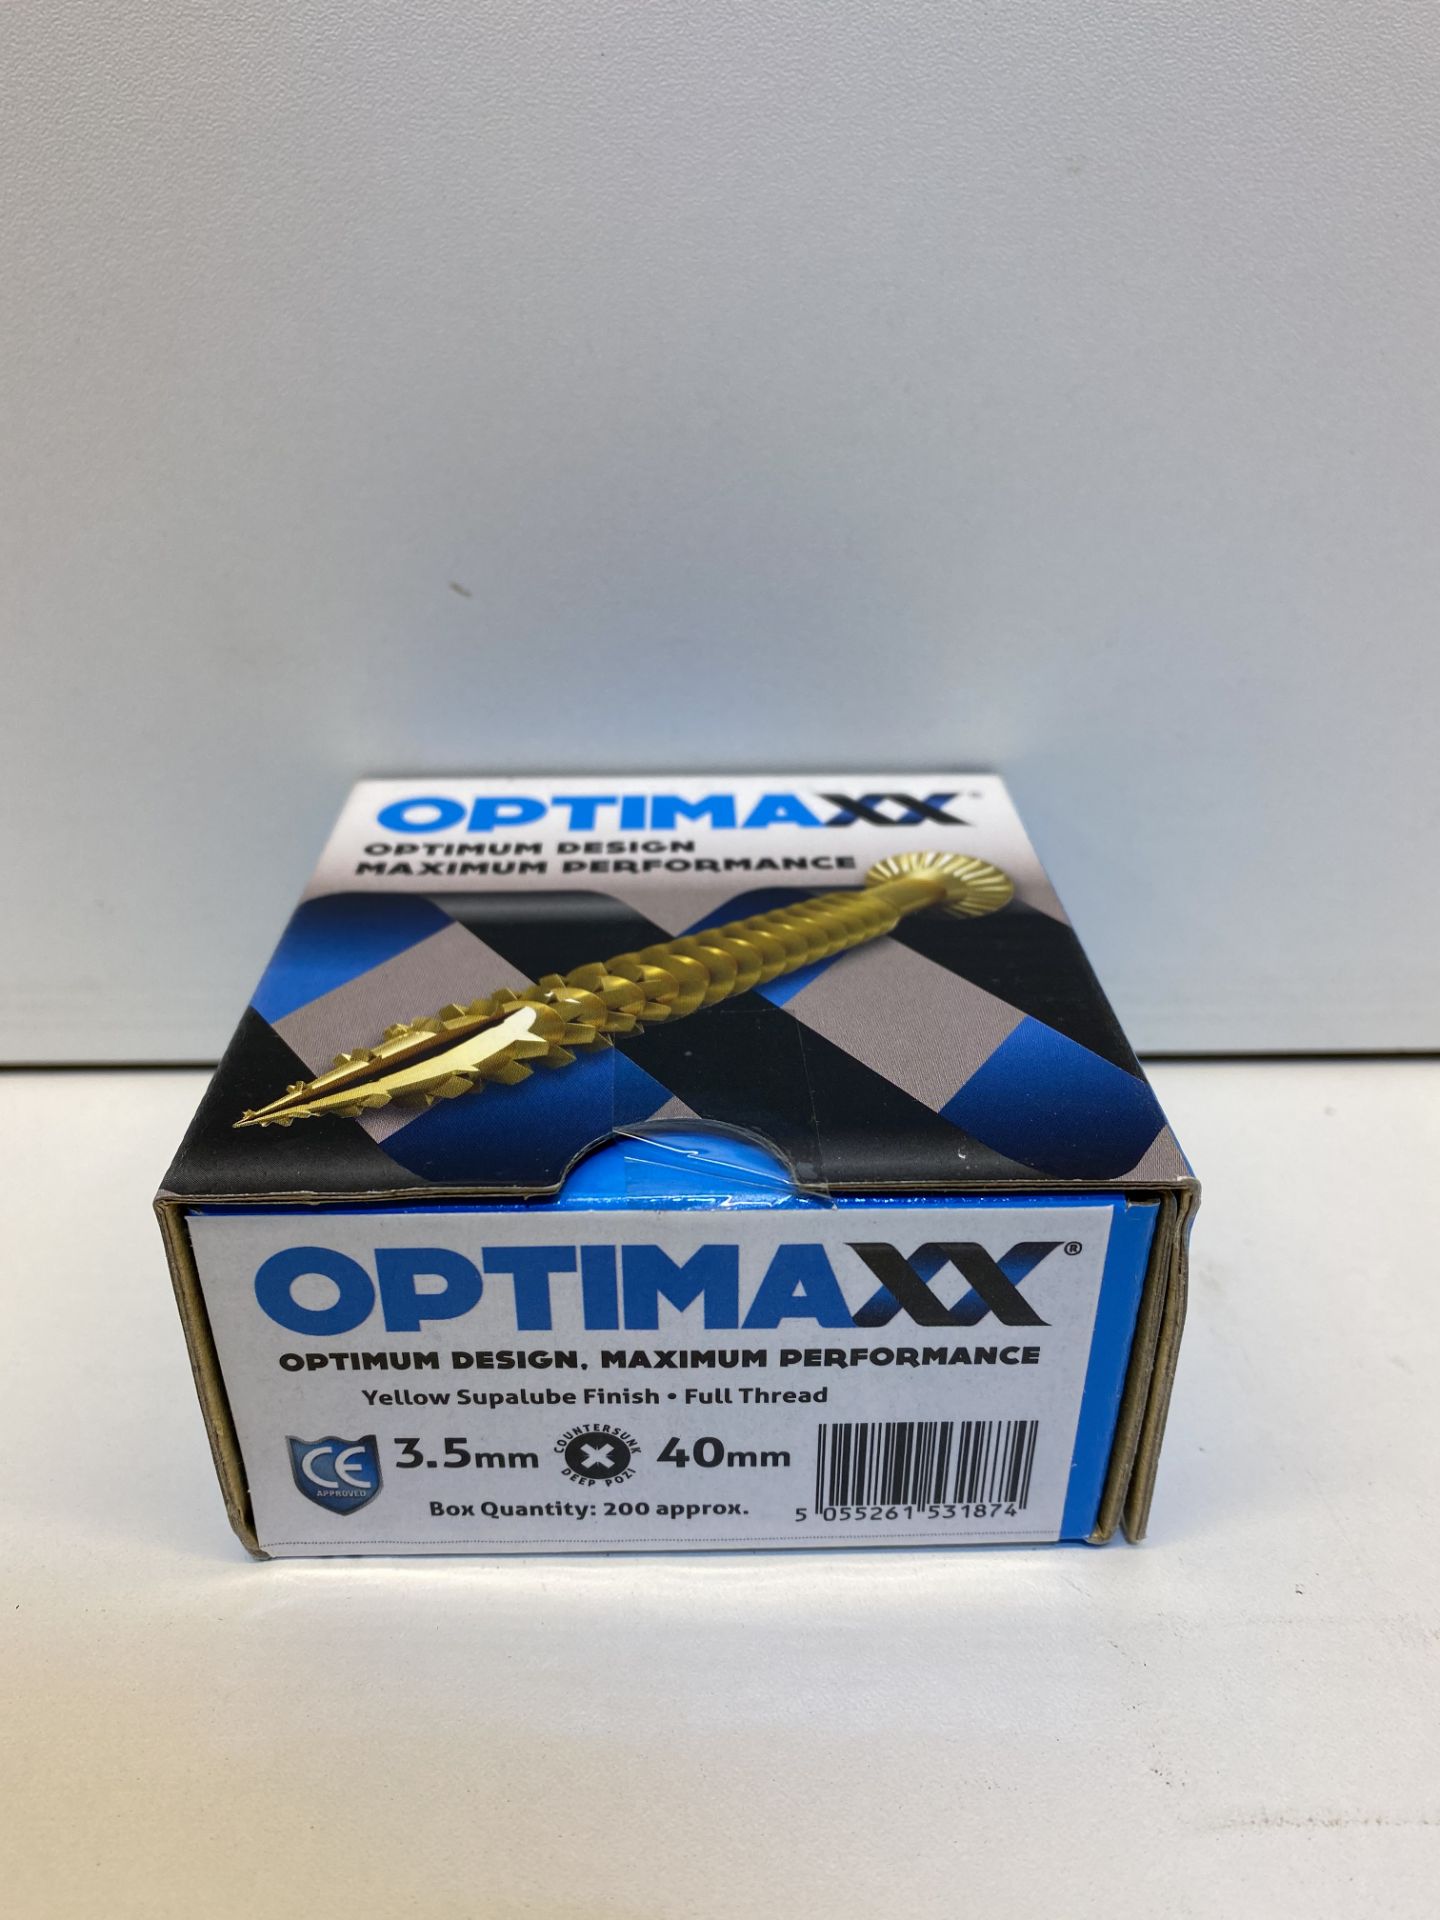 Optimaxx Wood Screw Selection in Case + Tape Measure - Image 9 of 12